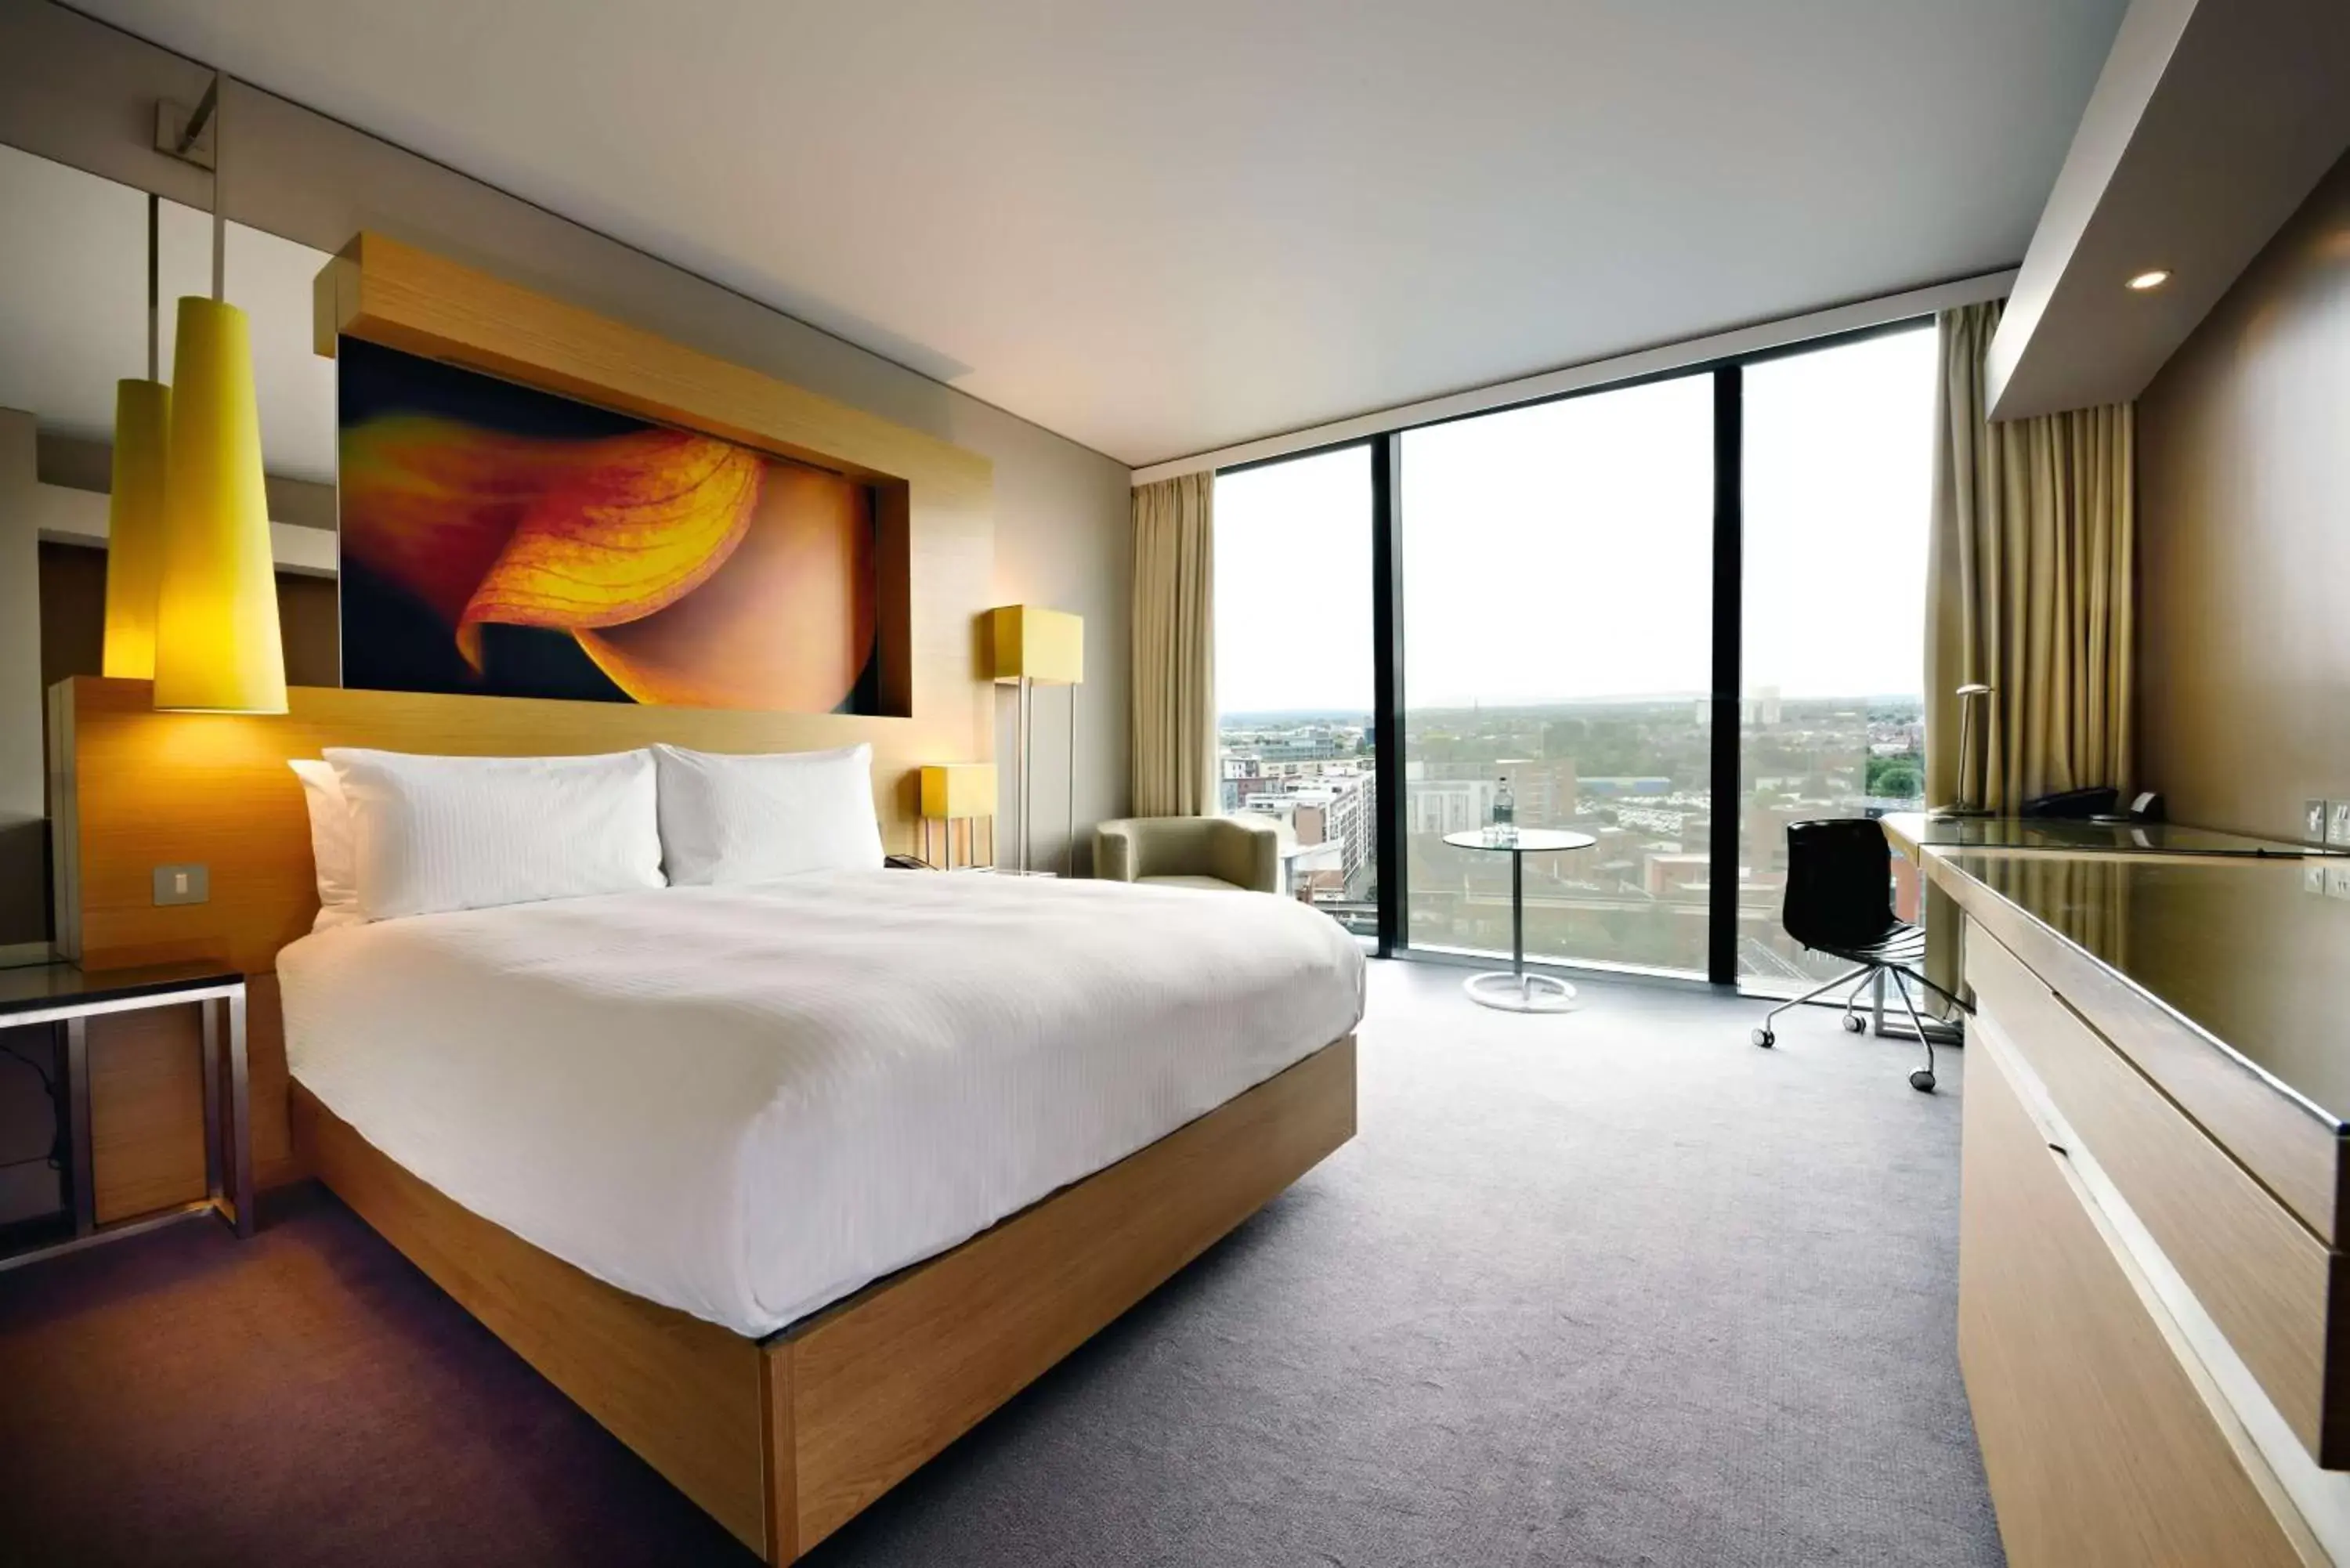 Bedroom in Hilton Manchester Deansgate